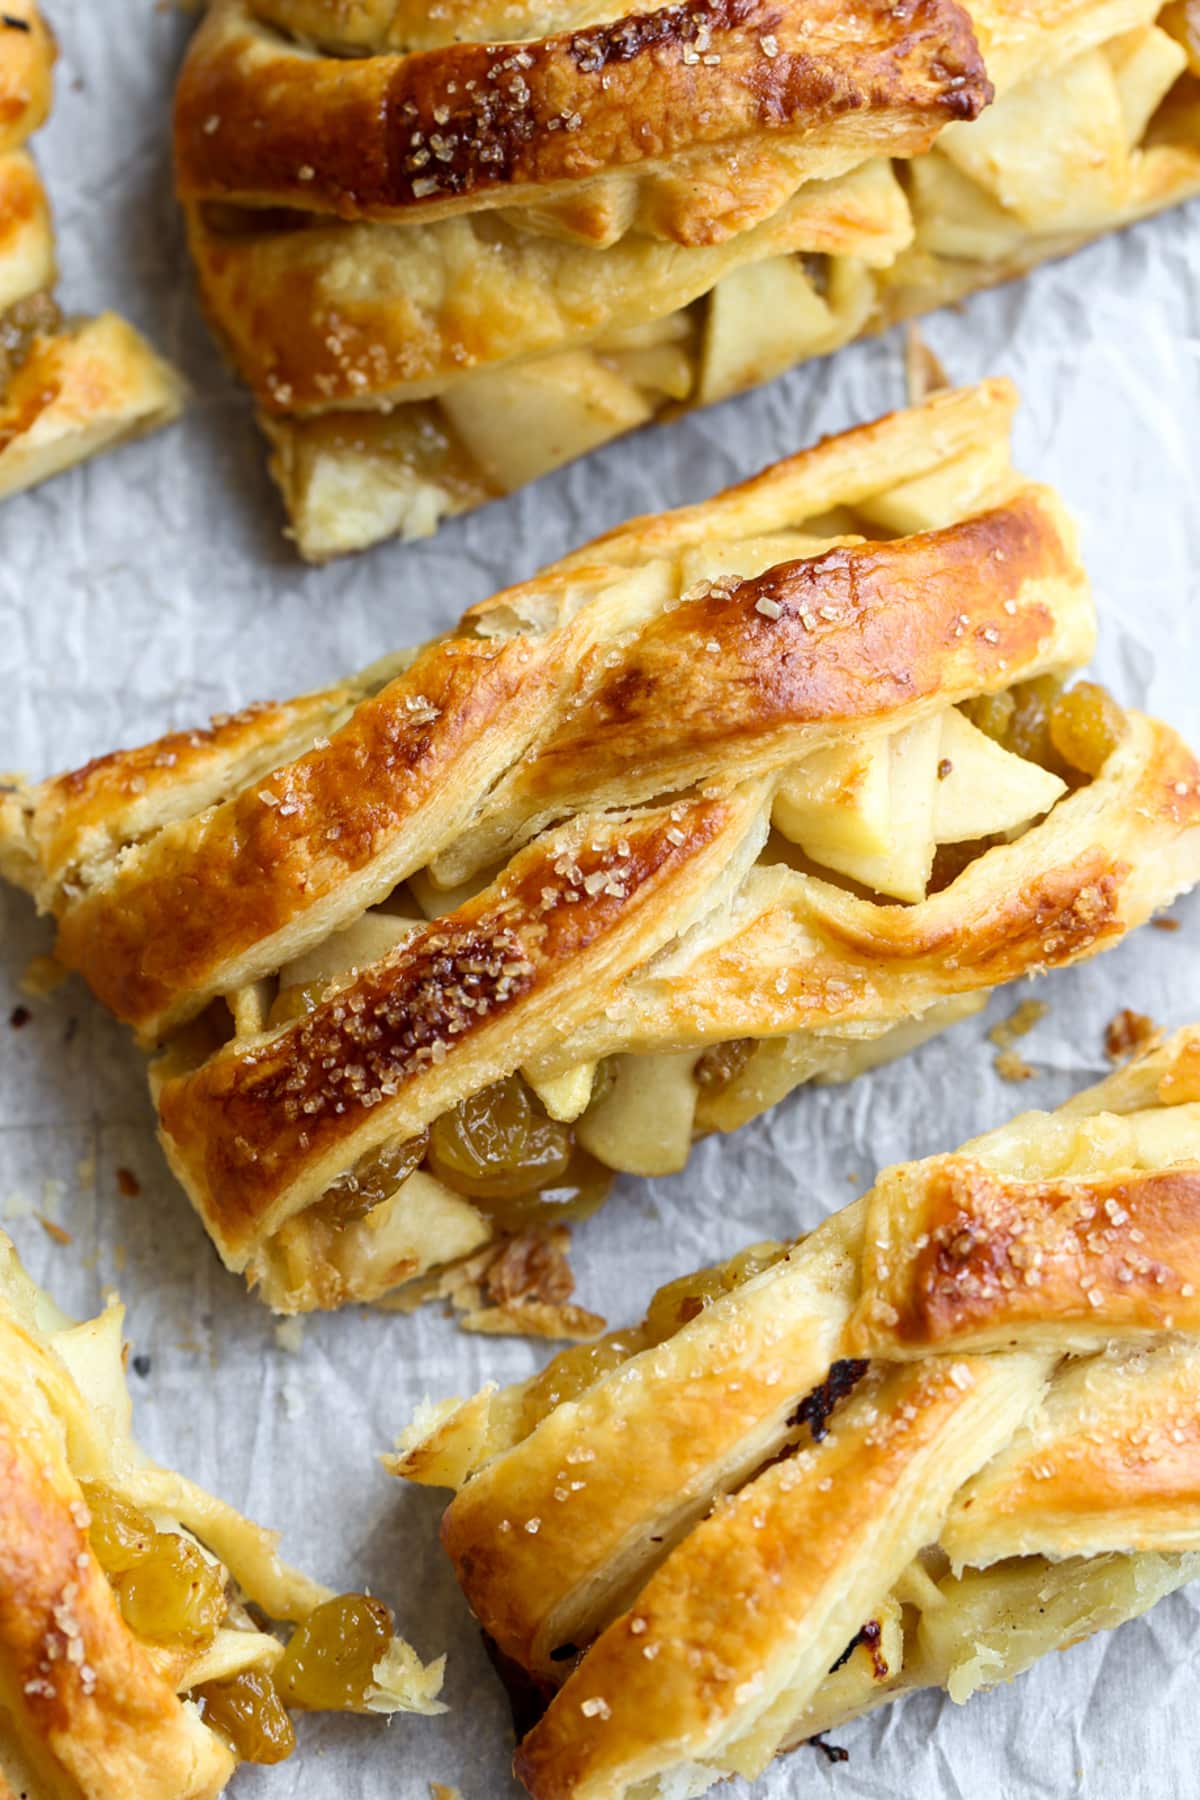 Slices of apple strudel with golden brown pastry